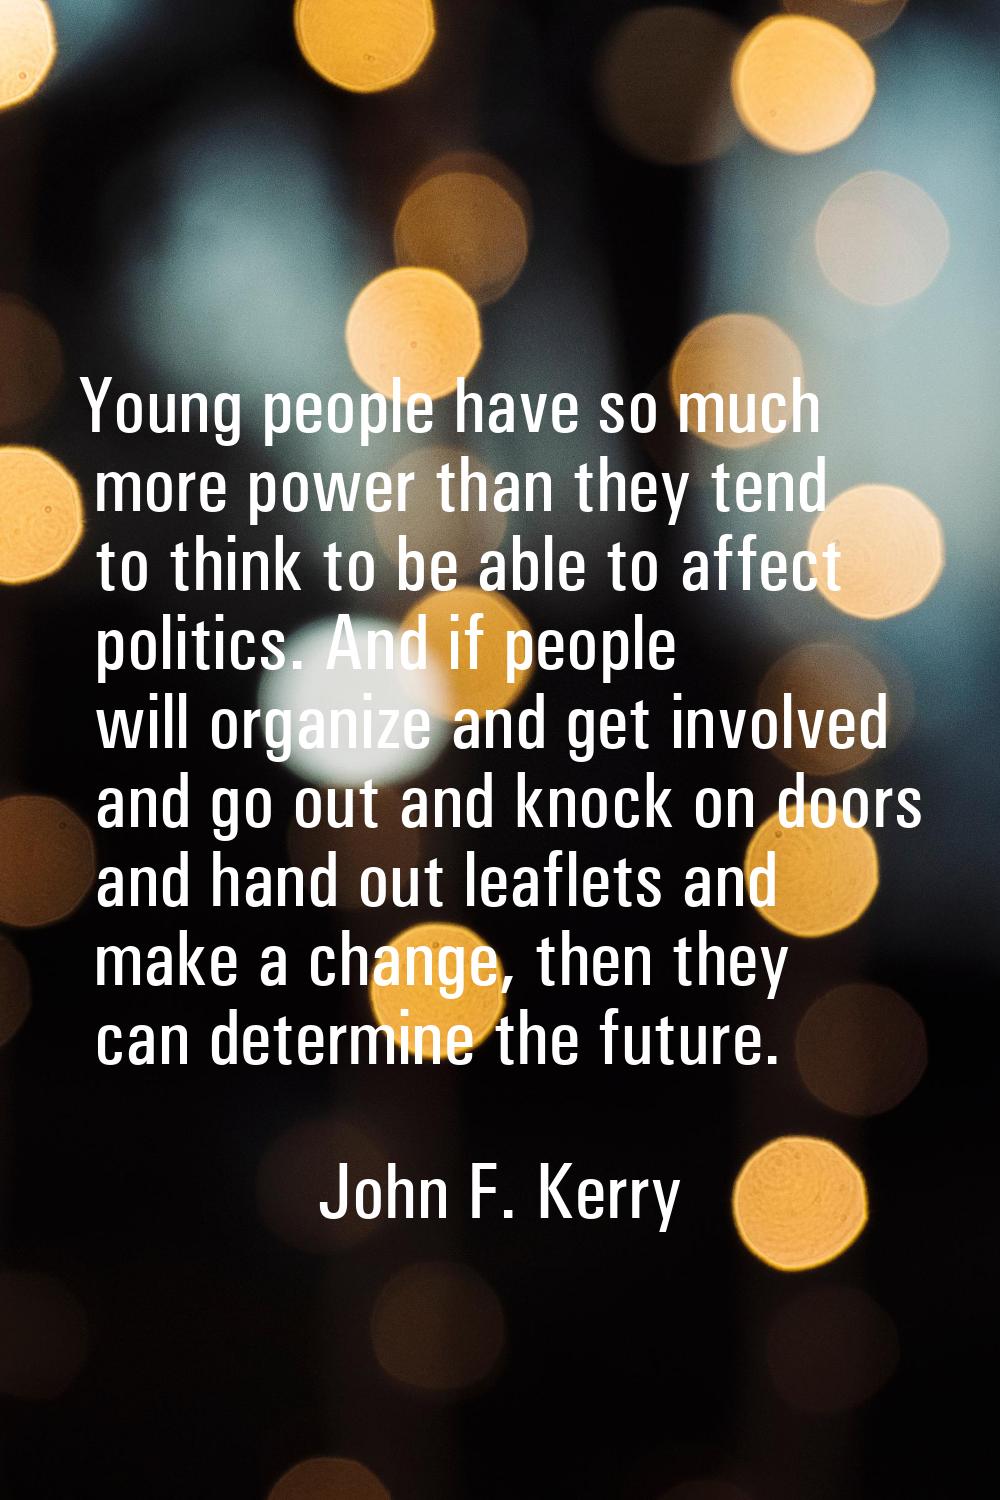 Young people have so much more power than they tend to think to be able to affect politics. And if 